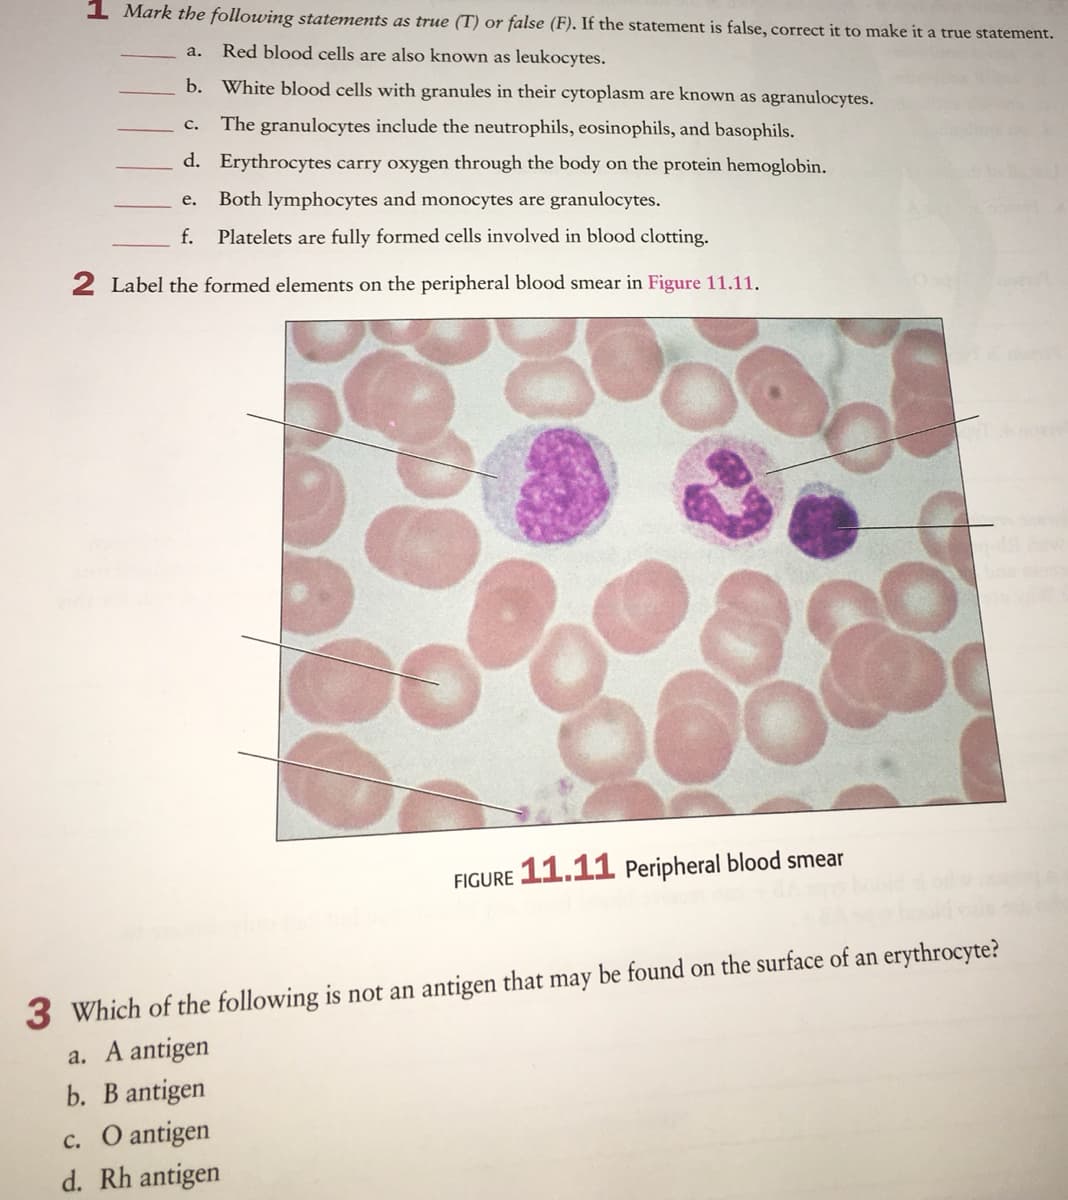 1 Mark the following statements as true (T) or false (F). If the statement is false, correct it to make it a true statement.
Red blood cells are also known as leukocytes.
a.
b. White blood cells with granules in their cytoplasm are known as agranulocytes.
The granulocytes include the neutrophils, eosinophils, and basophils.
с.
d. Erythrocytes carry oxygen through the body on the protein hemoglobin.
е.
Both lymphocytes and monocytes are granulocytes.
f.
Platelets are fully formed cells involved in blood clotting.
2 Label the formed elements on the peripheral blood smear in Figure 11.11.
FIGURE 11.11 Peripheral blood smear
3 Which of the following is not an antigen that may be found on the surface of an erythrocyte?
a. A antigen
b. B antigen
c. O antigen
d. Rh antigen
